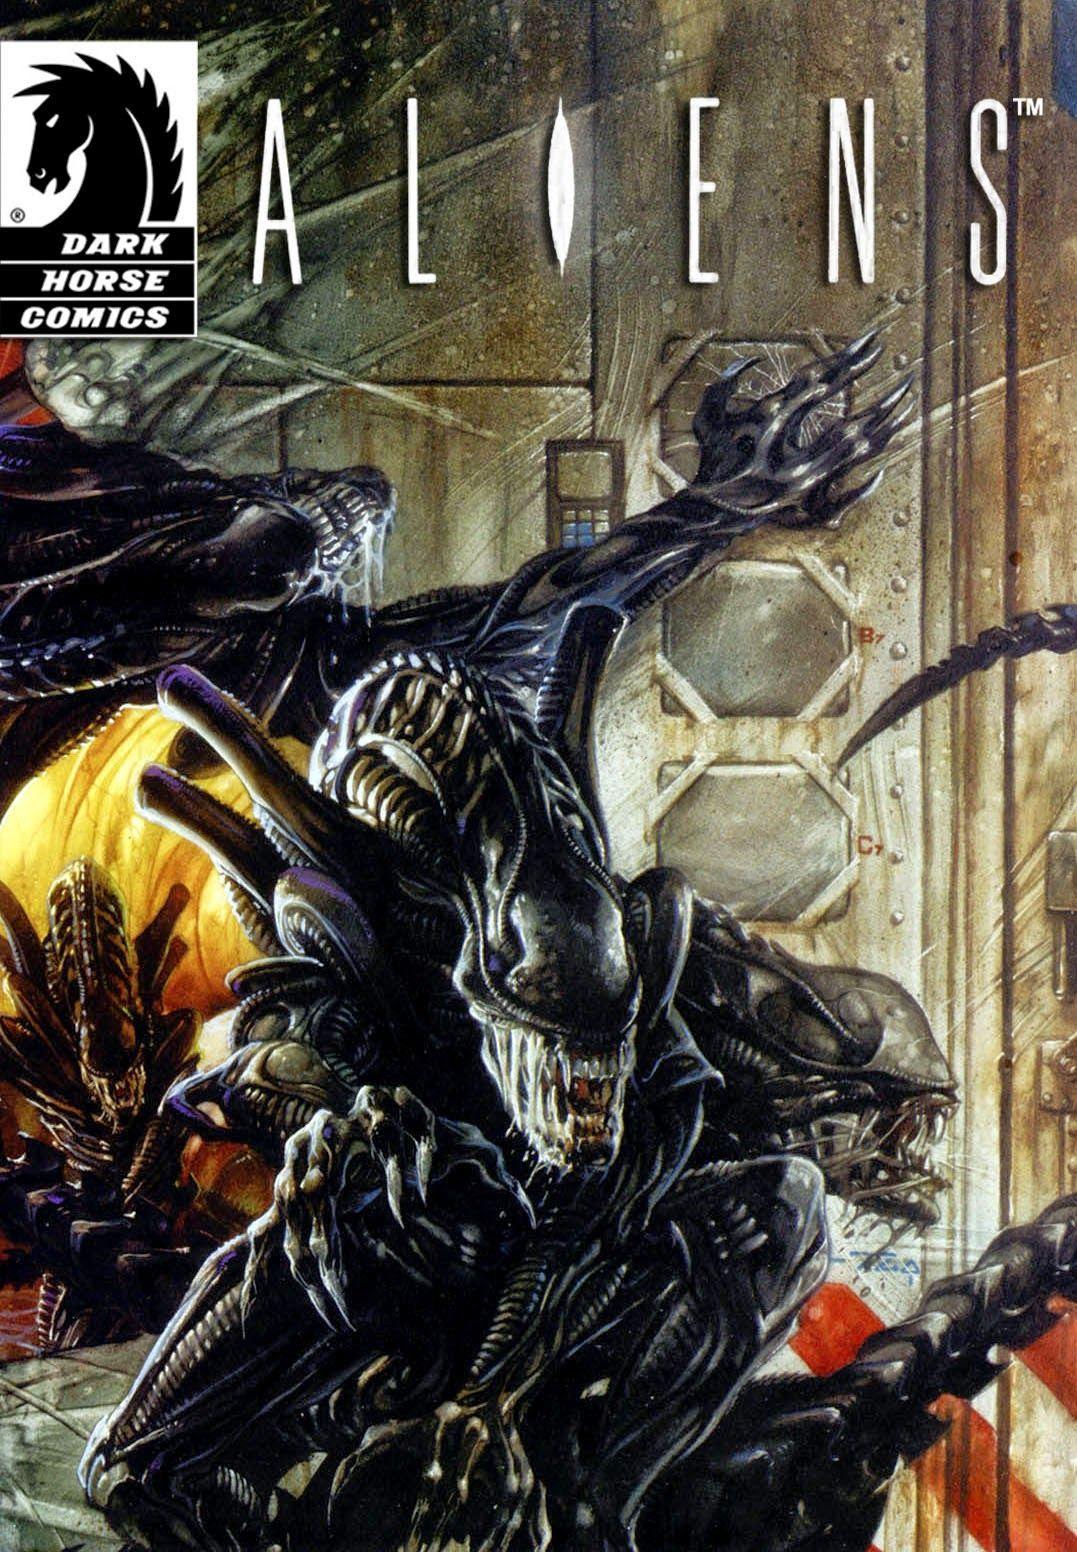 Dark Horse Comics took the industry by storm with release of Aliens